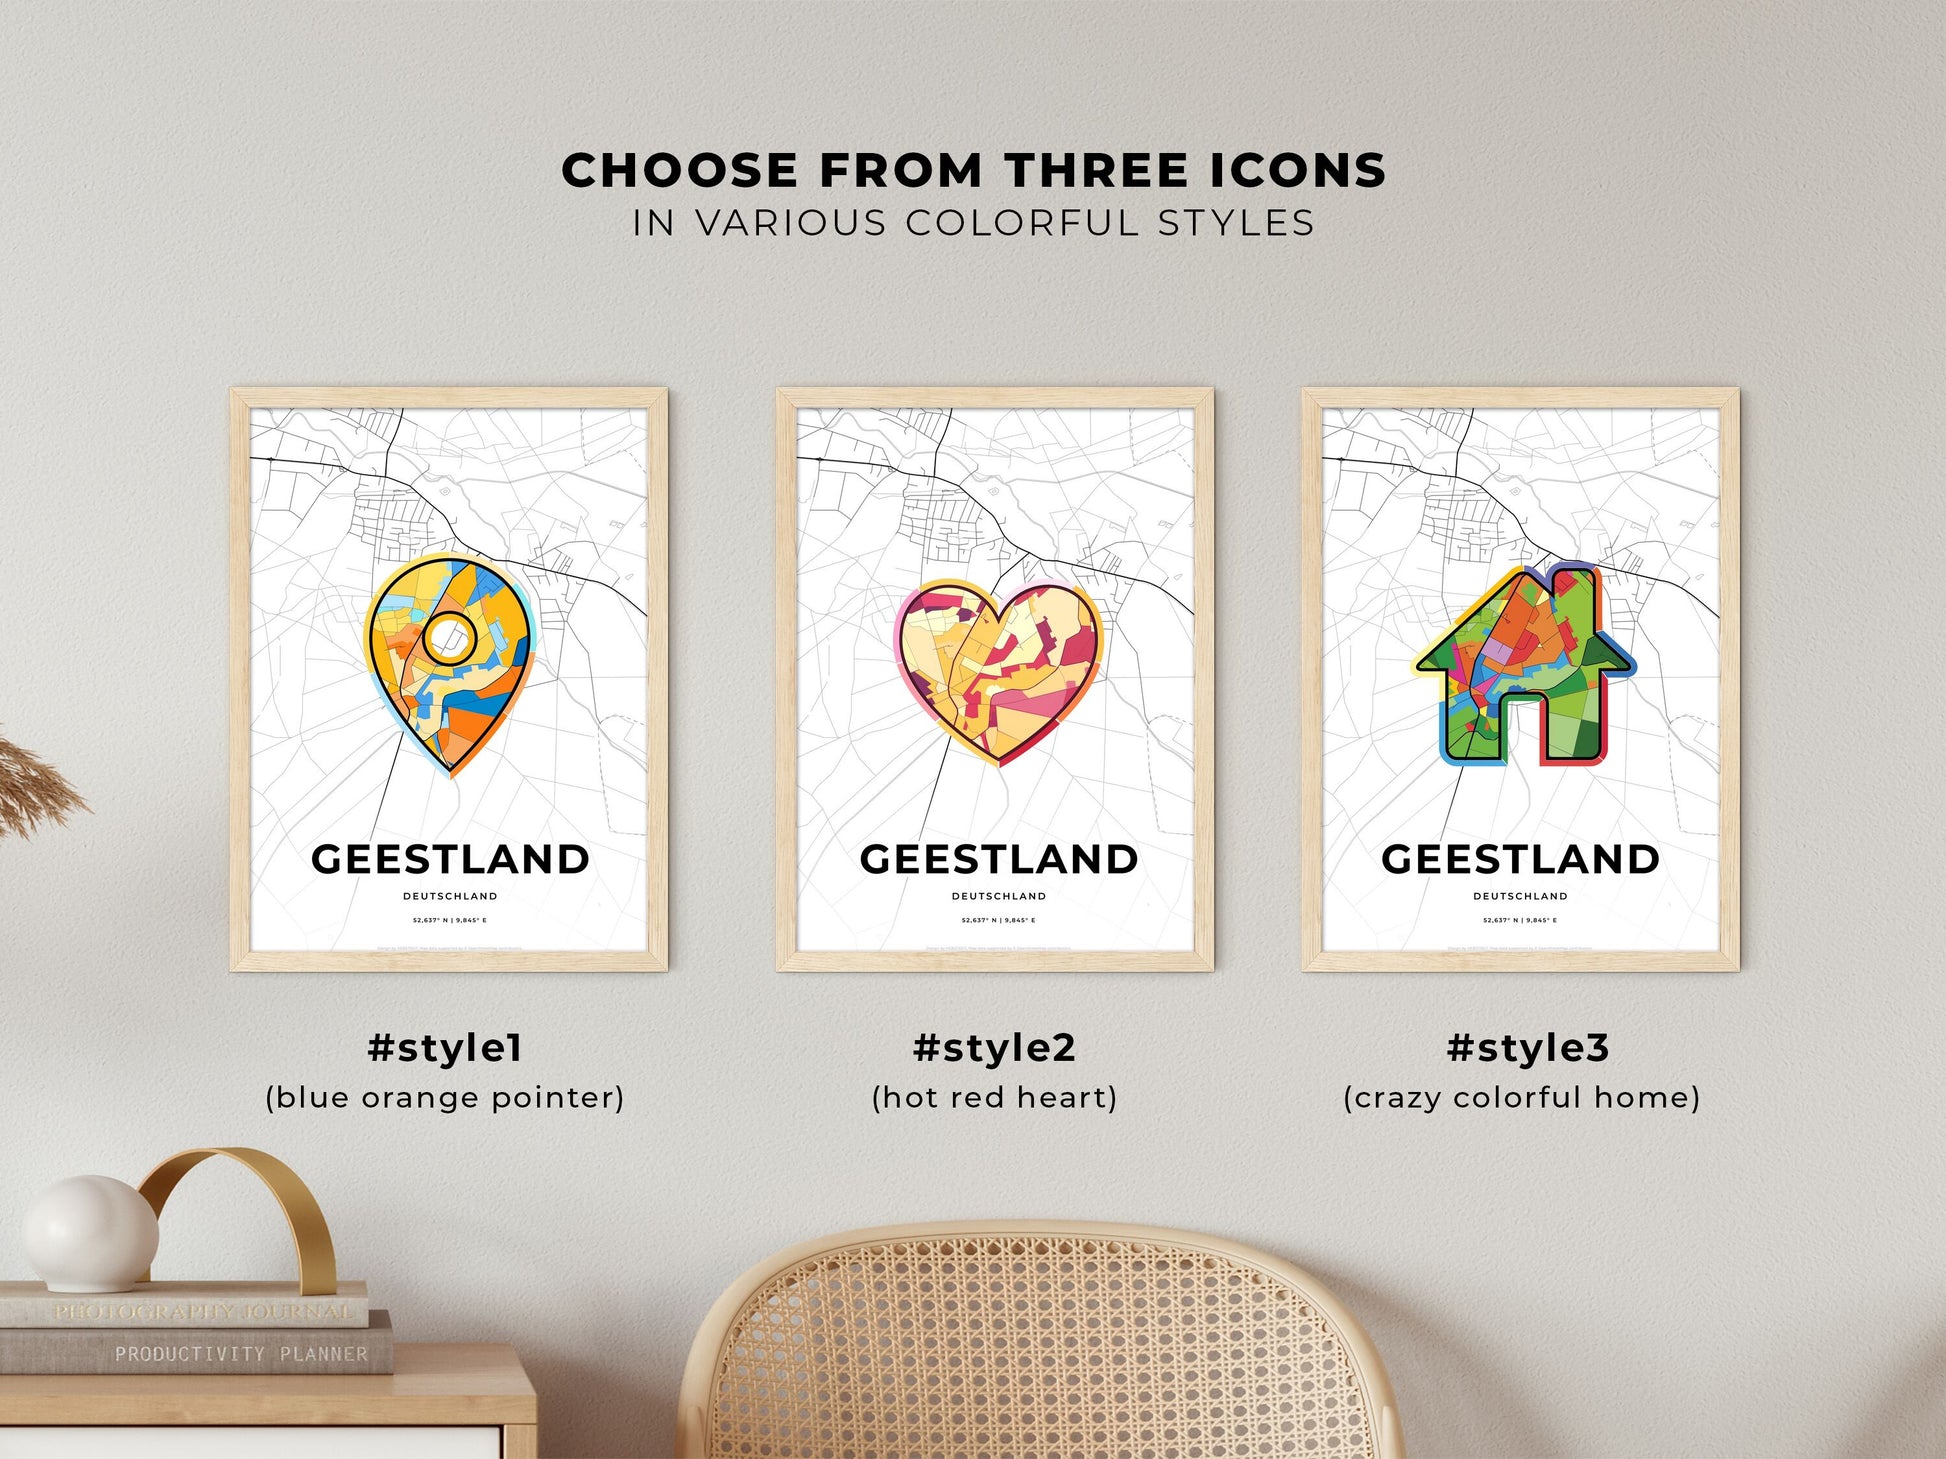 GEESTLAND GERMANY minimal art map with a colorful icon. Where it all began, Couple map gift.